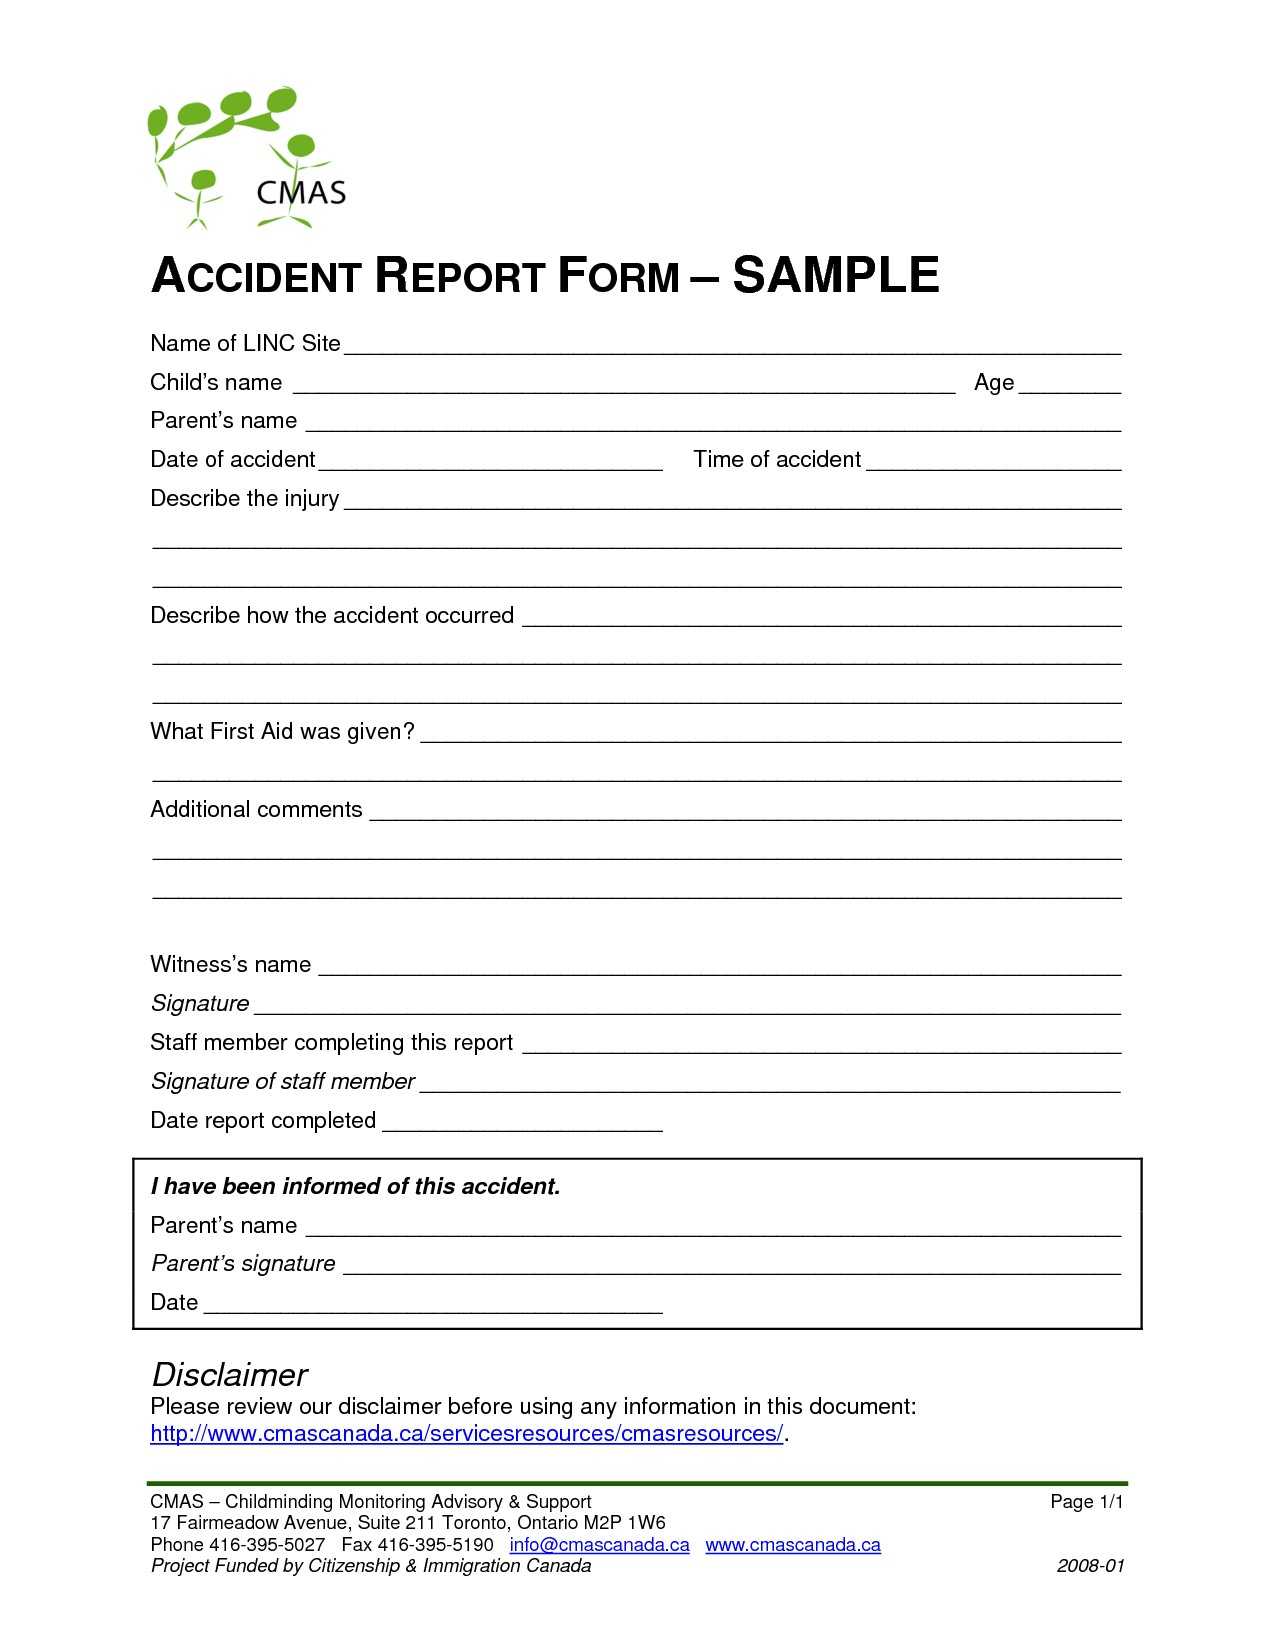 Insurance Incident Report Template - Atlantaauctionco Intended For Insurance Incident Report Template